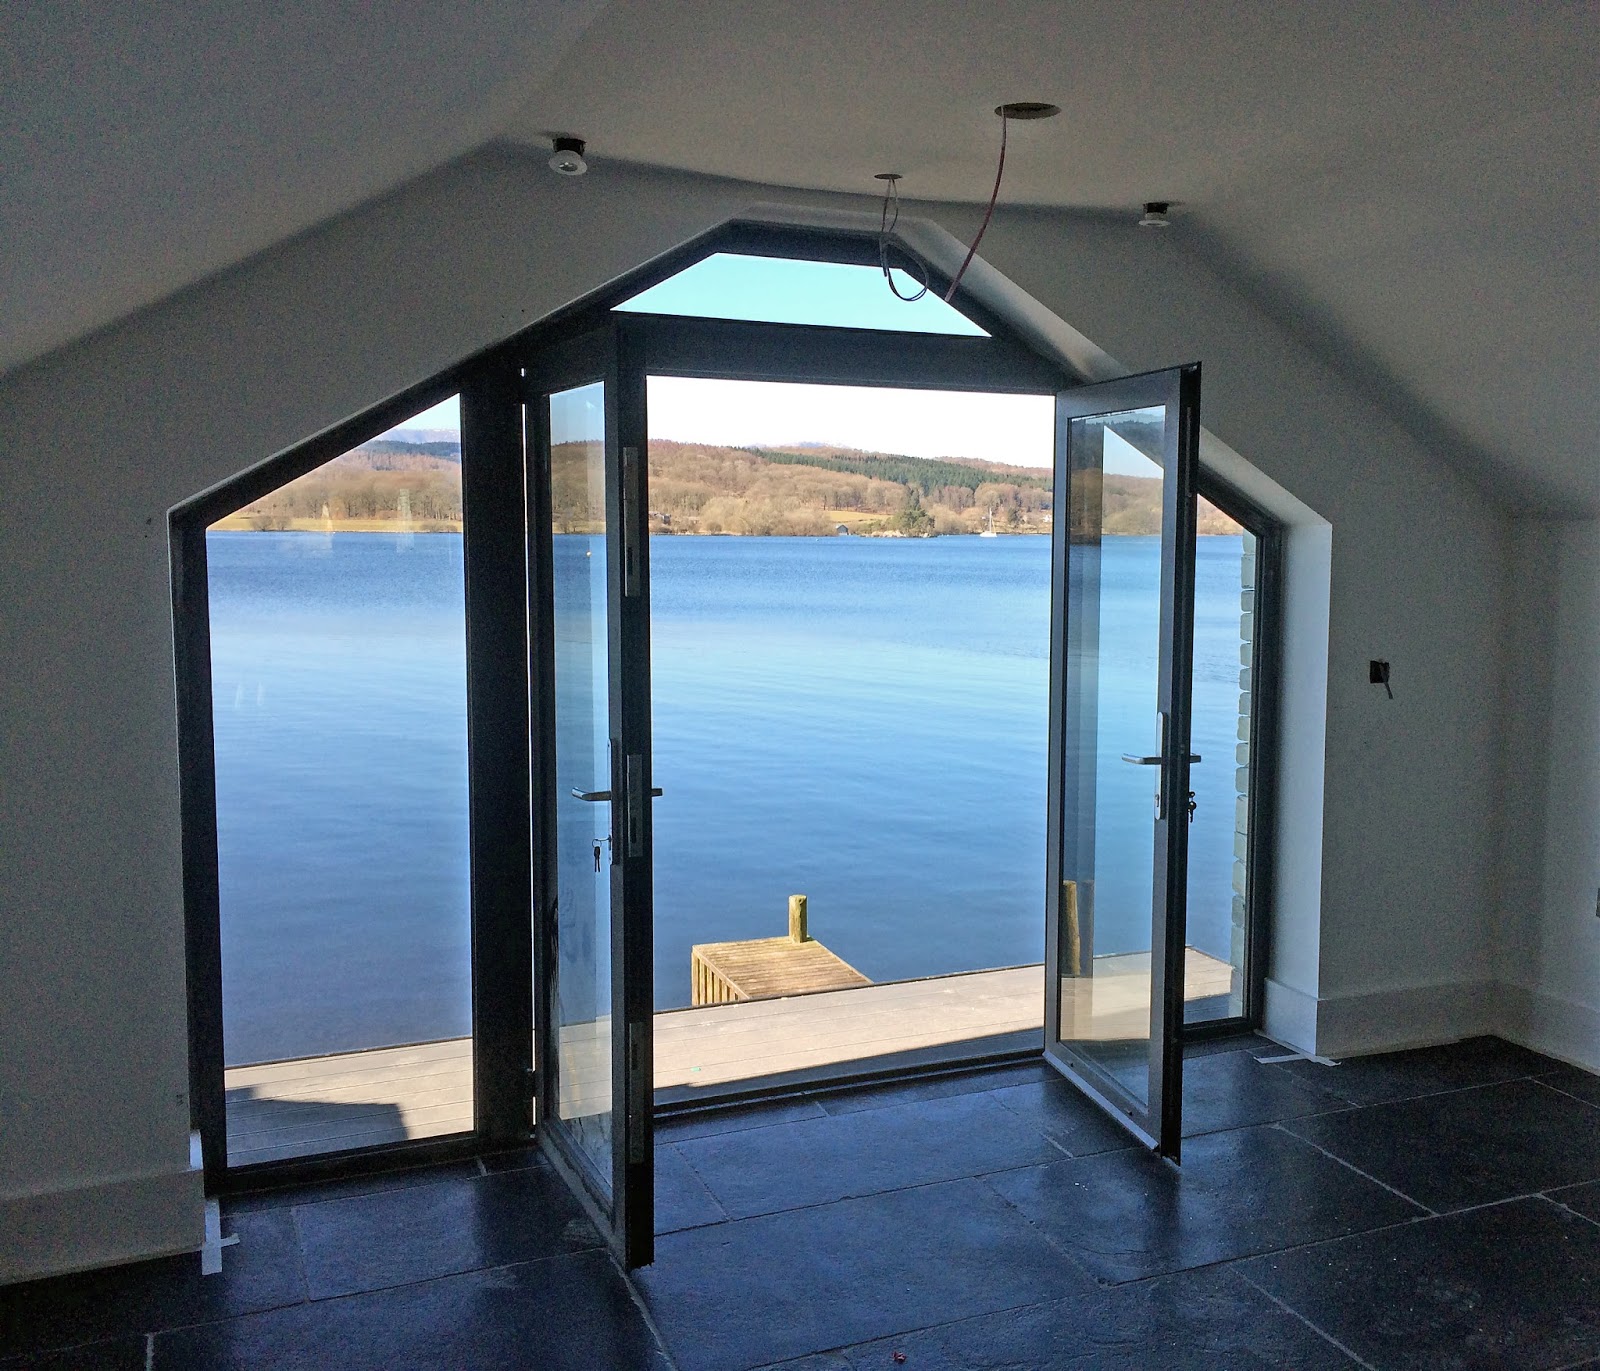 New double glazing for your Windermere home, or maybe you really want the latest triple glazing.